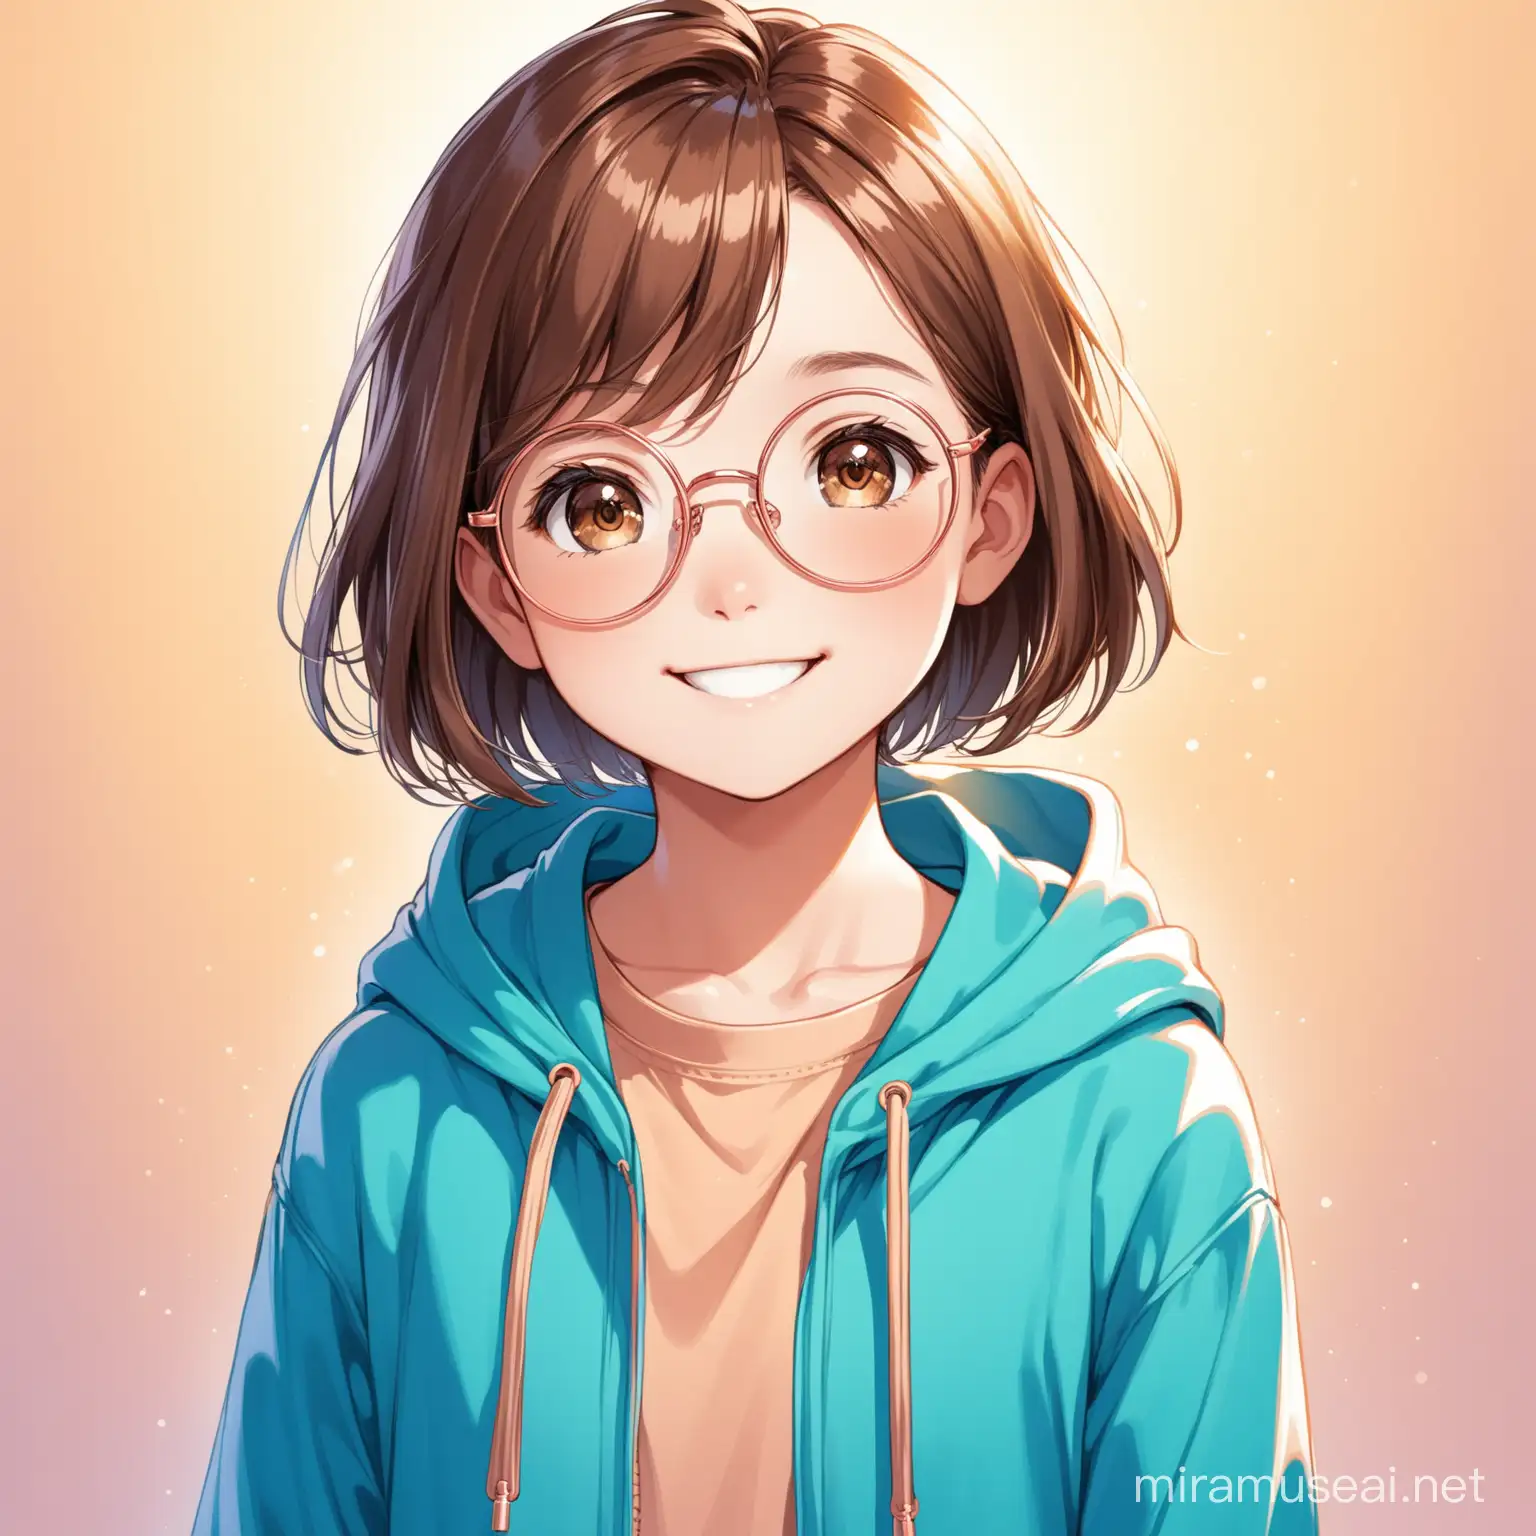 12 year old girl with brown eyes, short brown hair, rose gold glasses, smiling, eyes open, blue hoodie